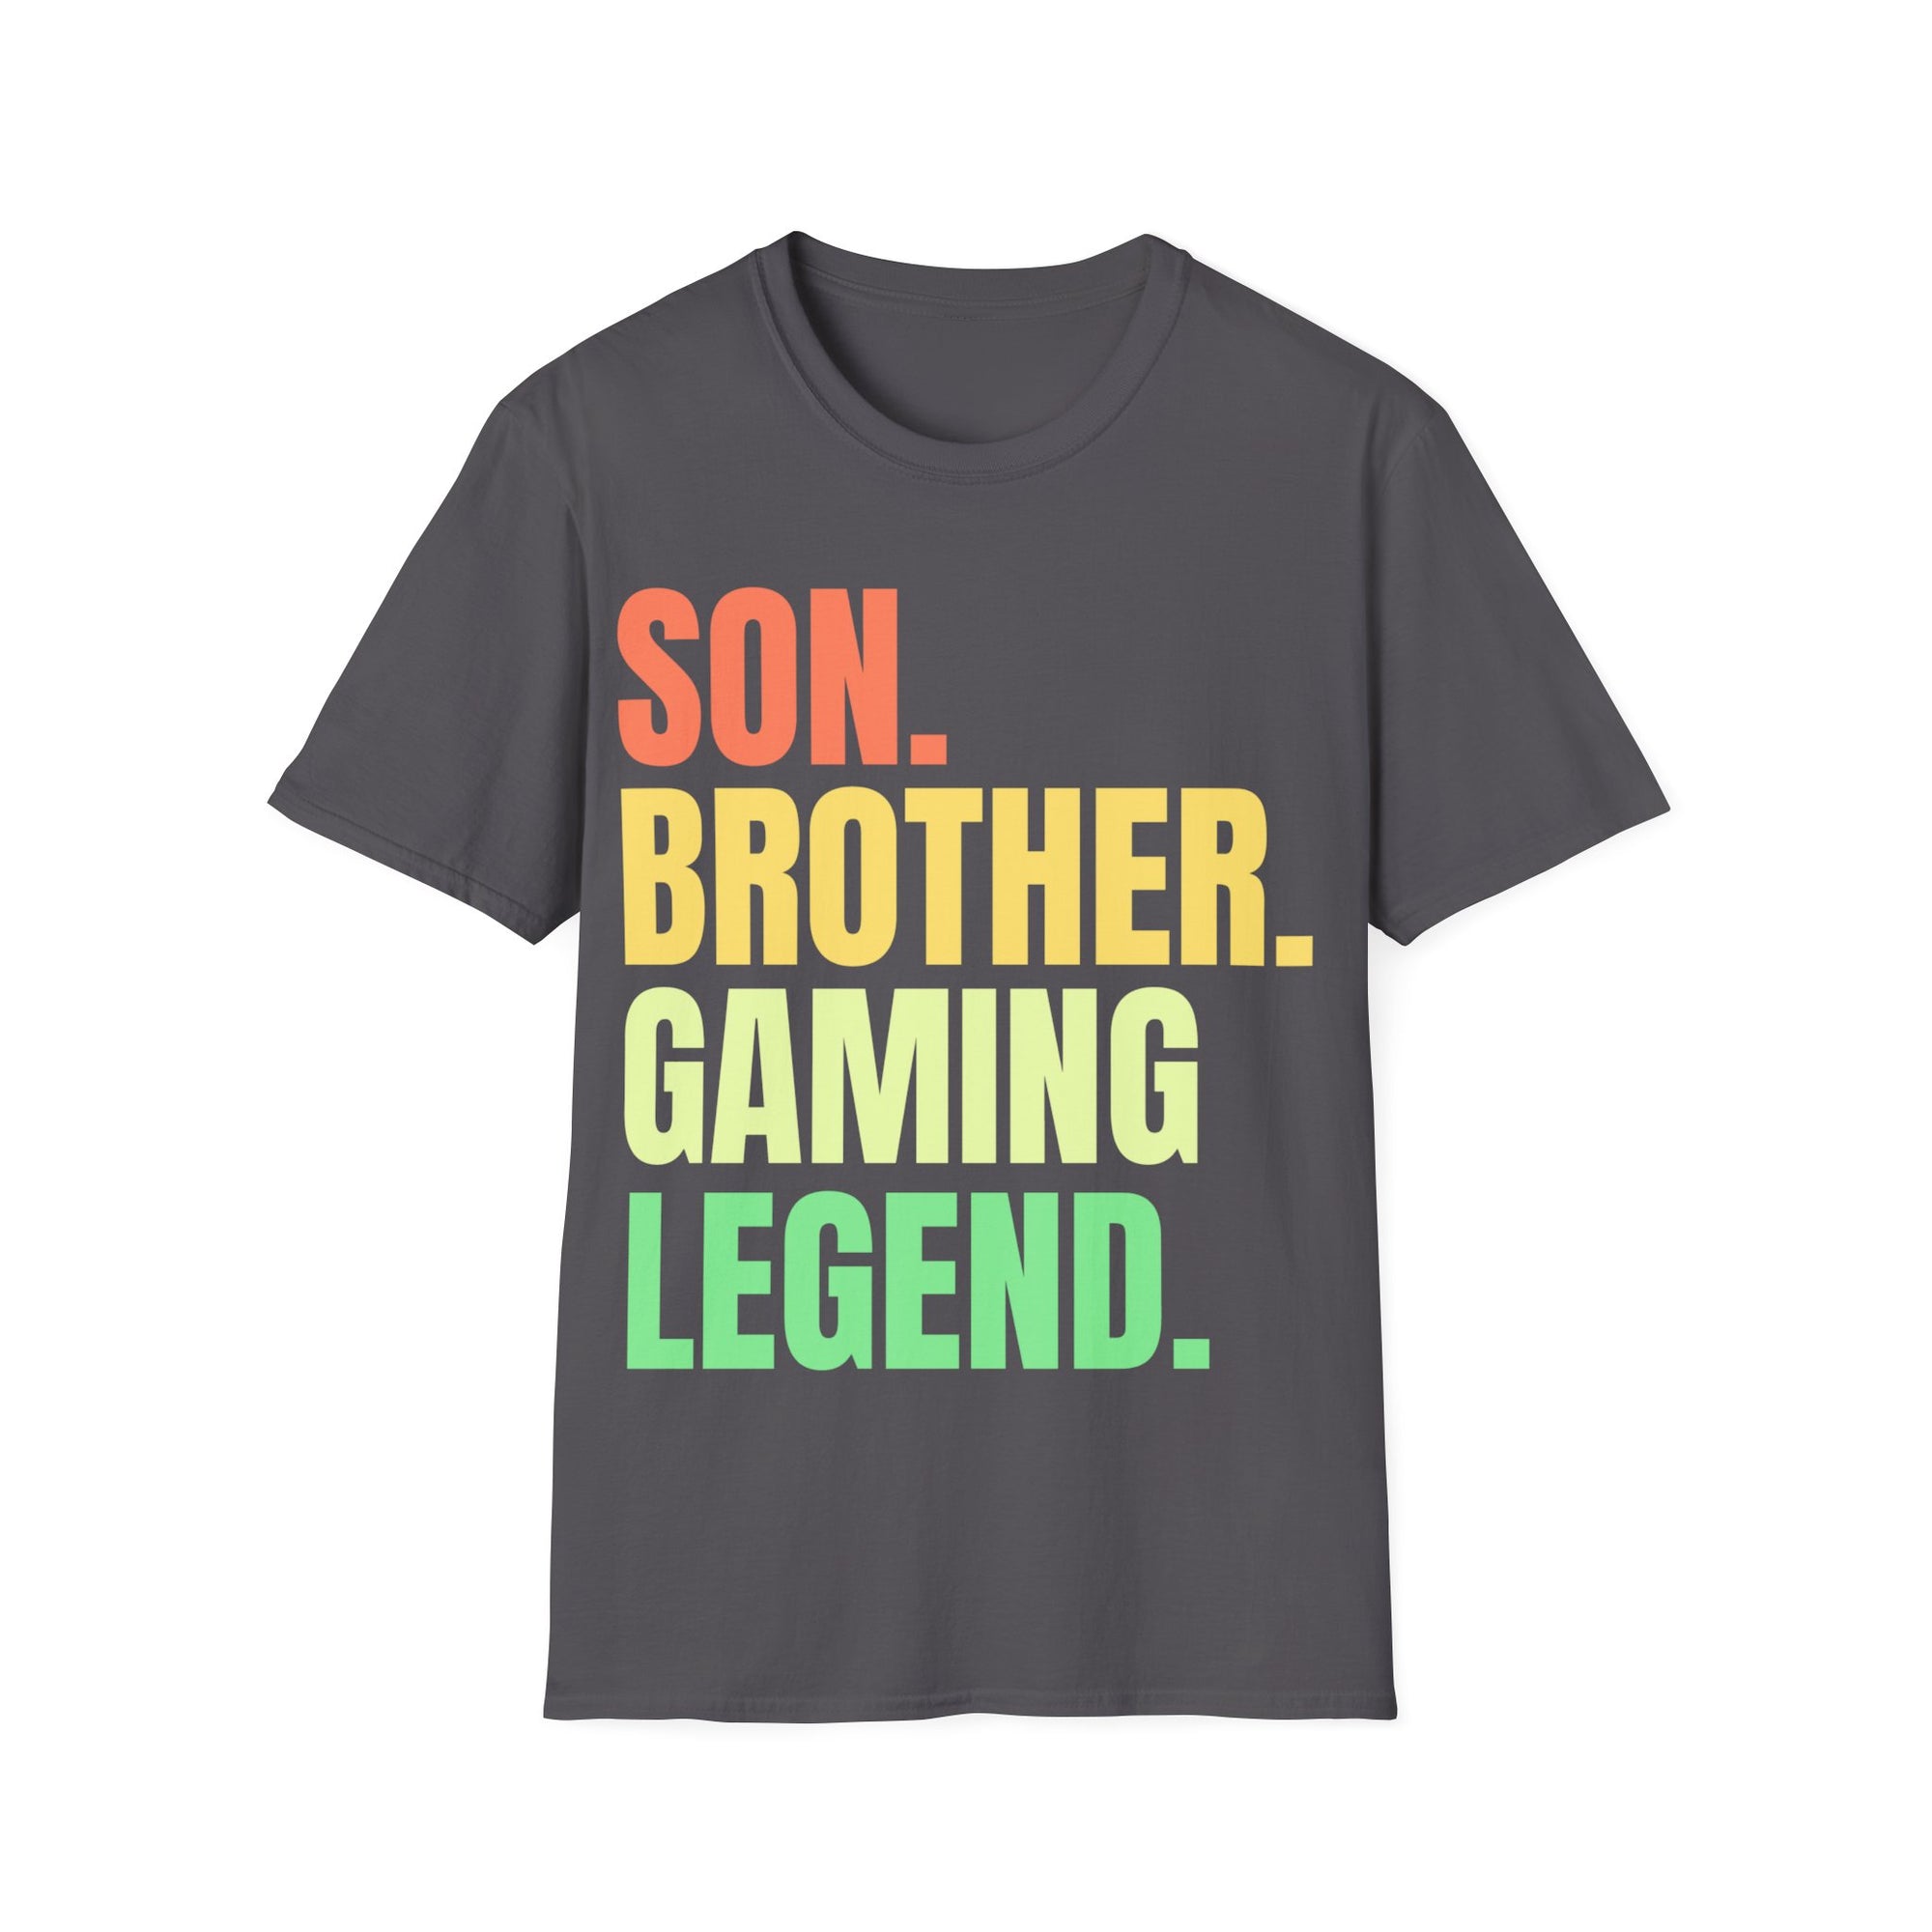 Son Brother Gaming Legend - T-shirt